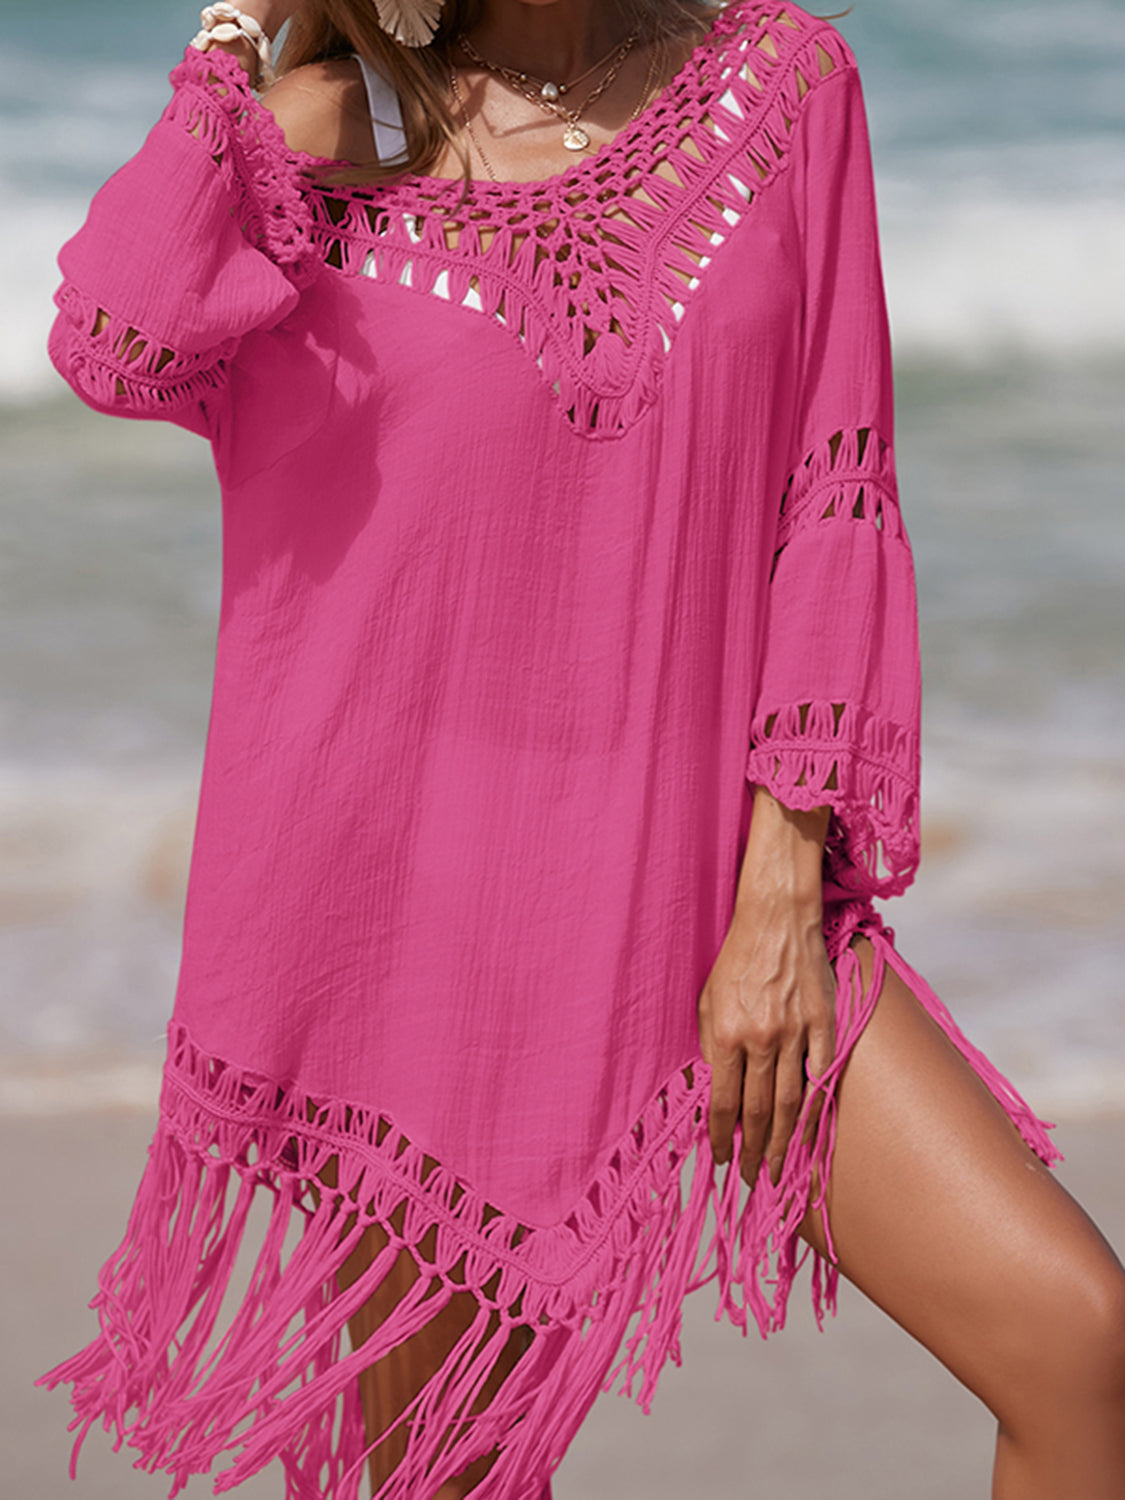 Cutout Fringe Scoop Neck Cover-Up Hot Pink One Size